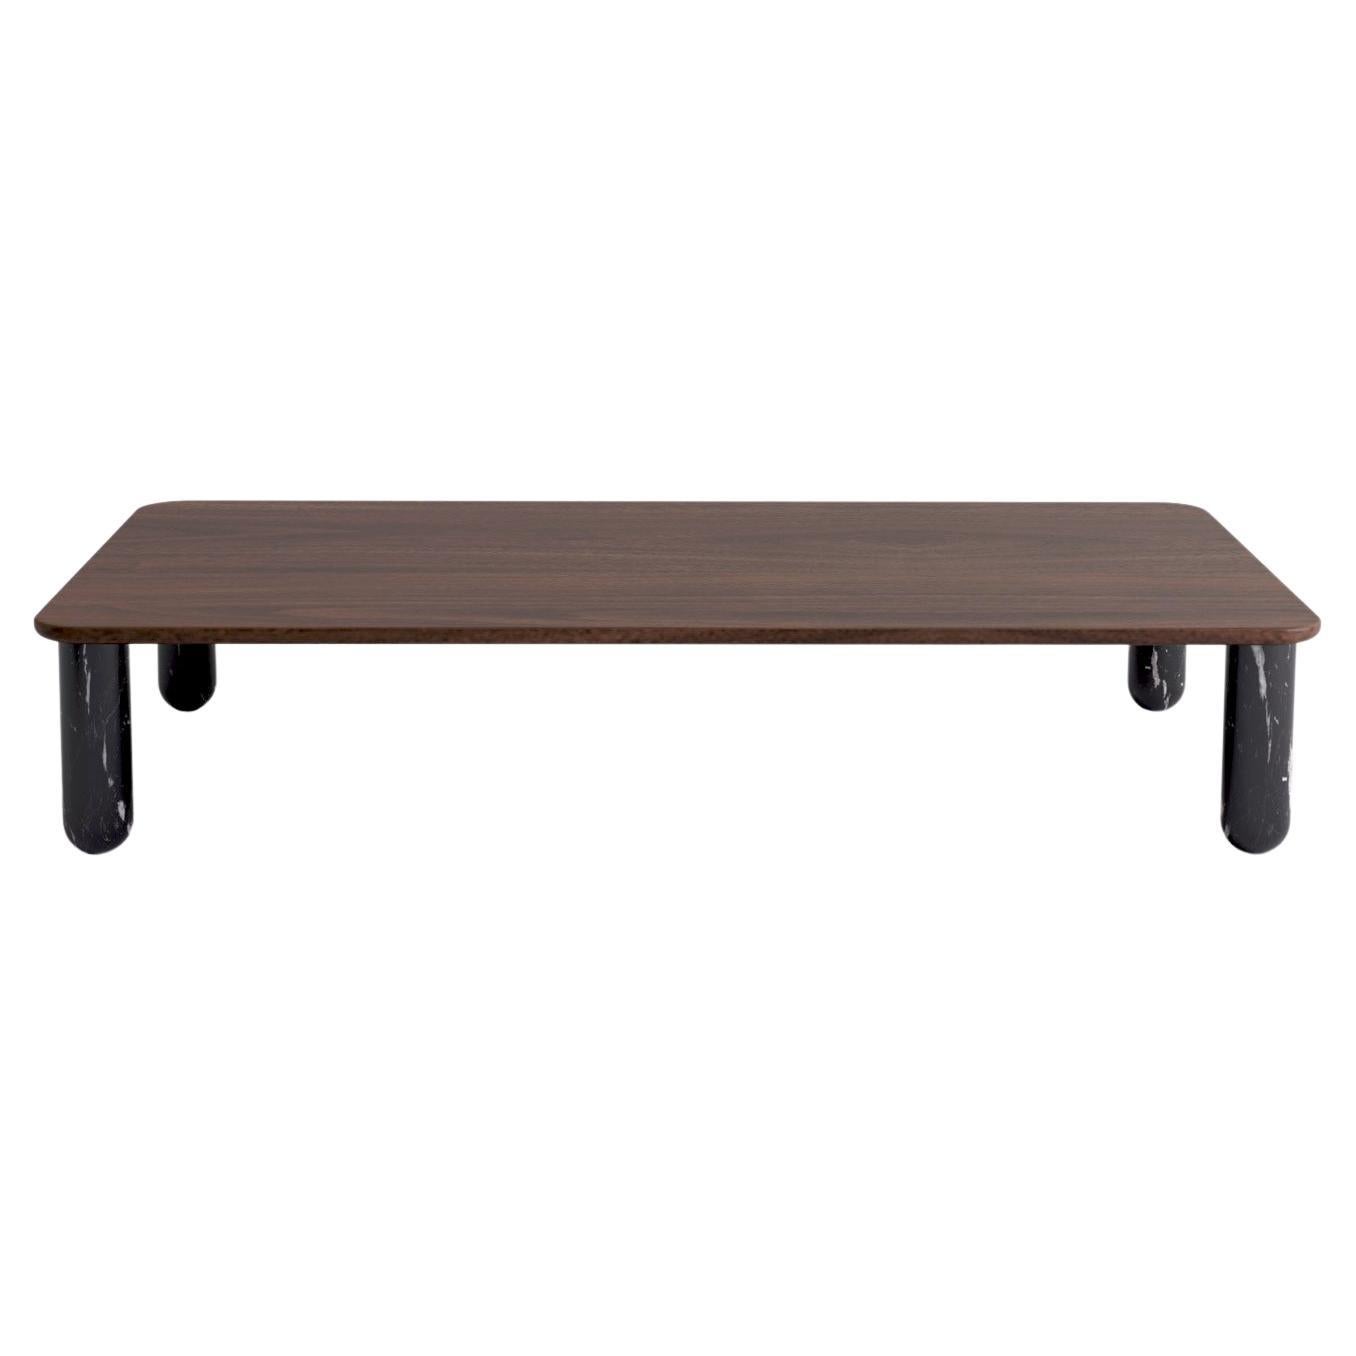 XLarge Walnut and Black Marble "Sunday" Coffee Table, Jean-Baptiste Souletie